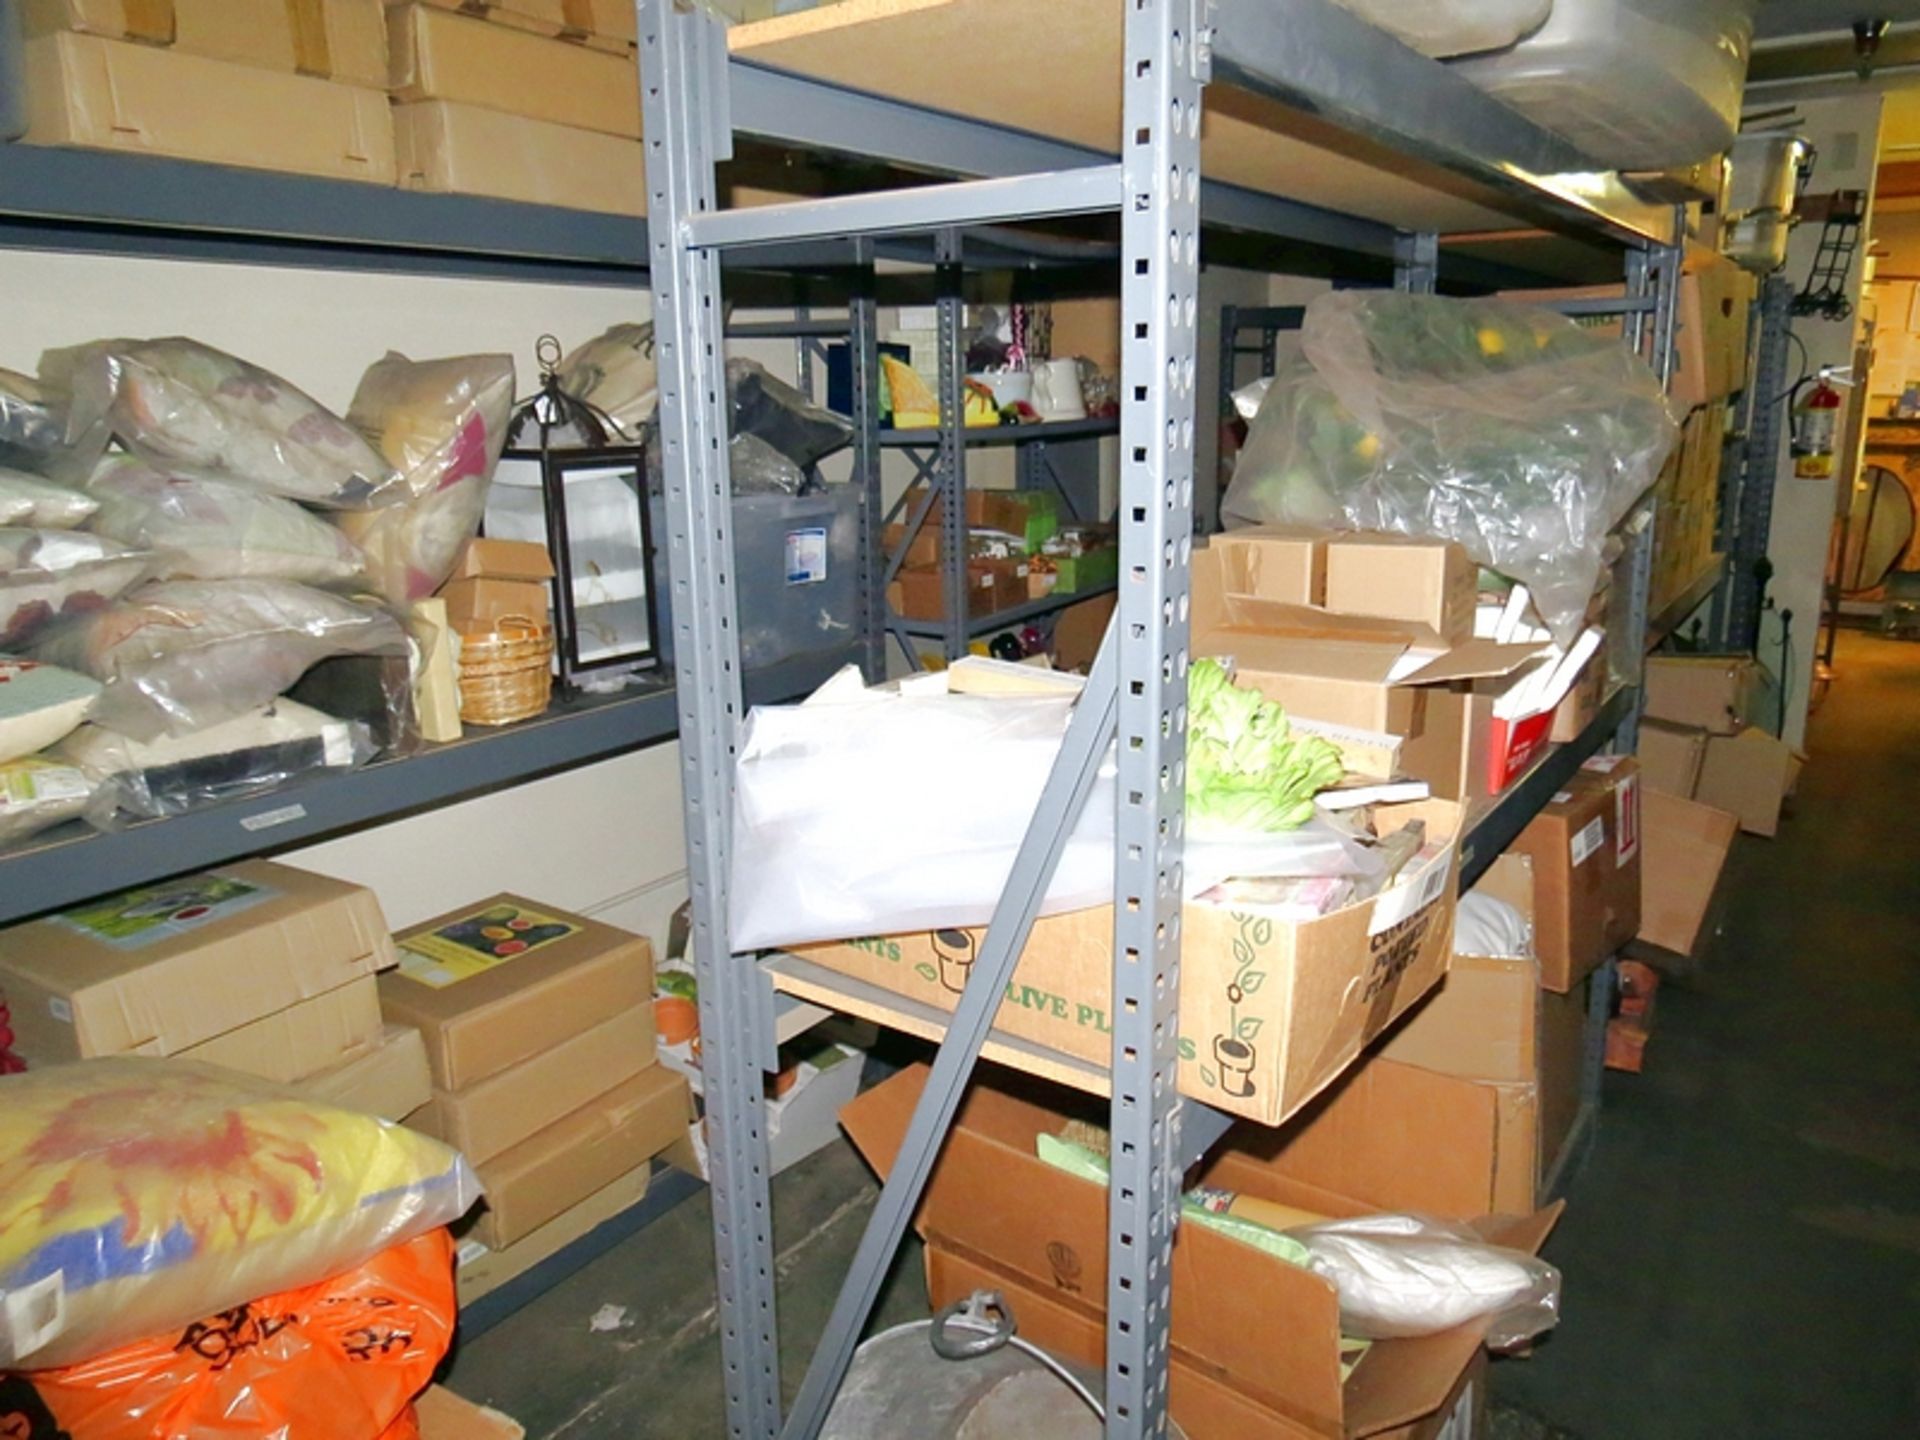 Lot Contents of Retail Storage Room, Pillows, Plates, Assorted Decor, Metal Displays - Image 3 of 6